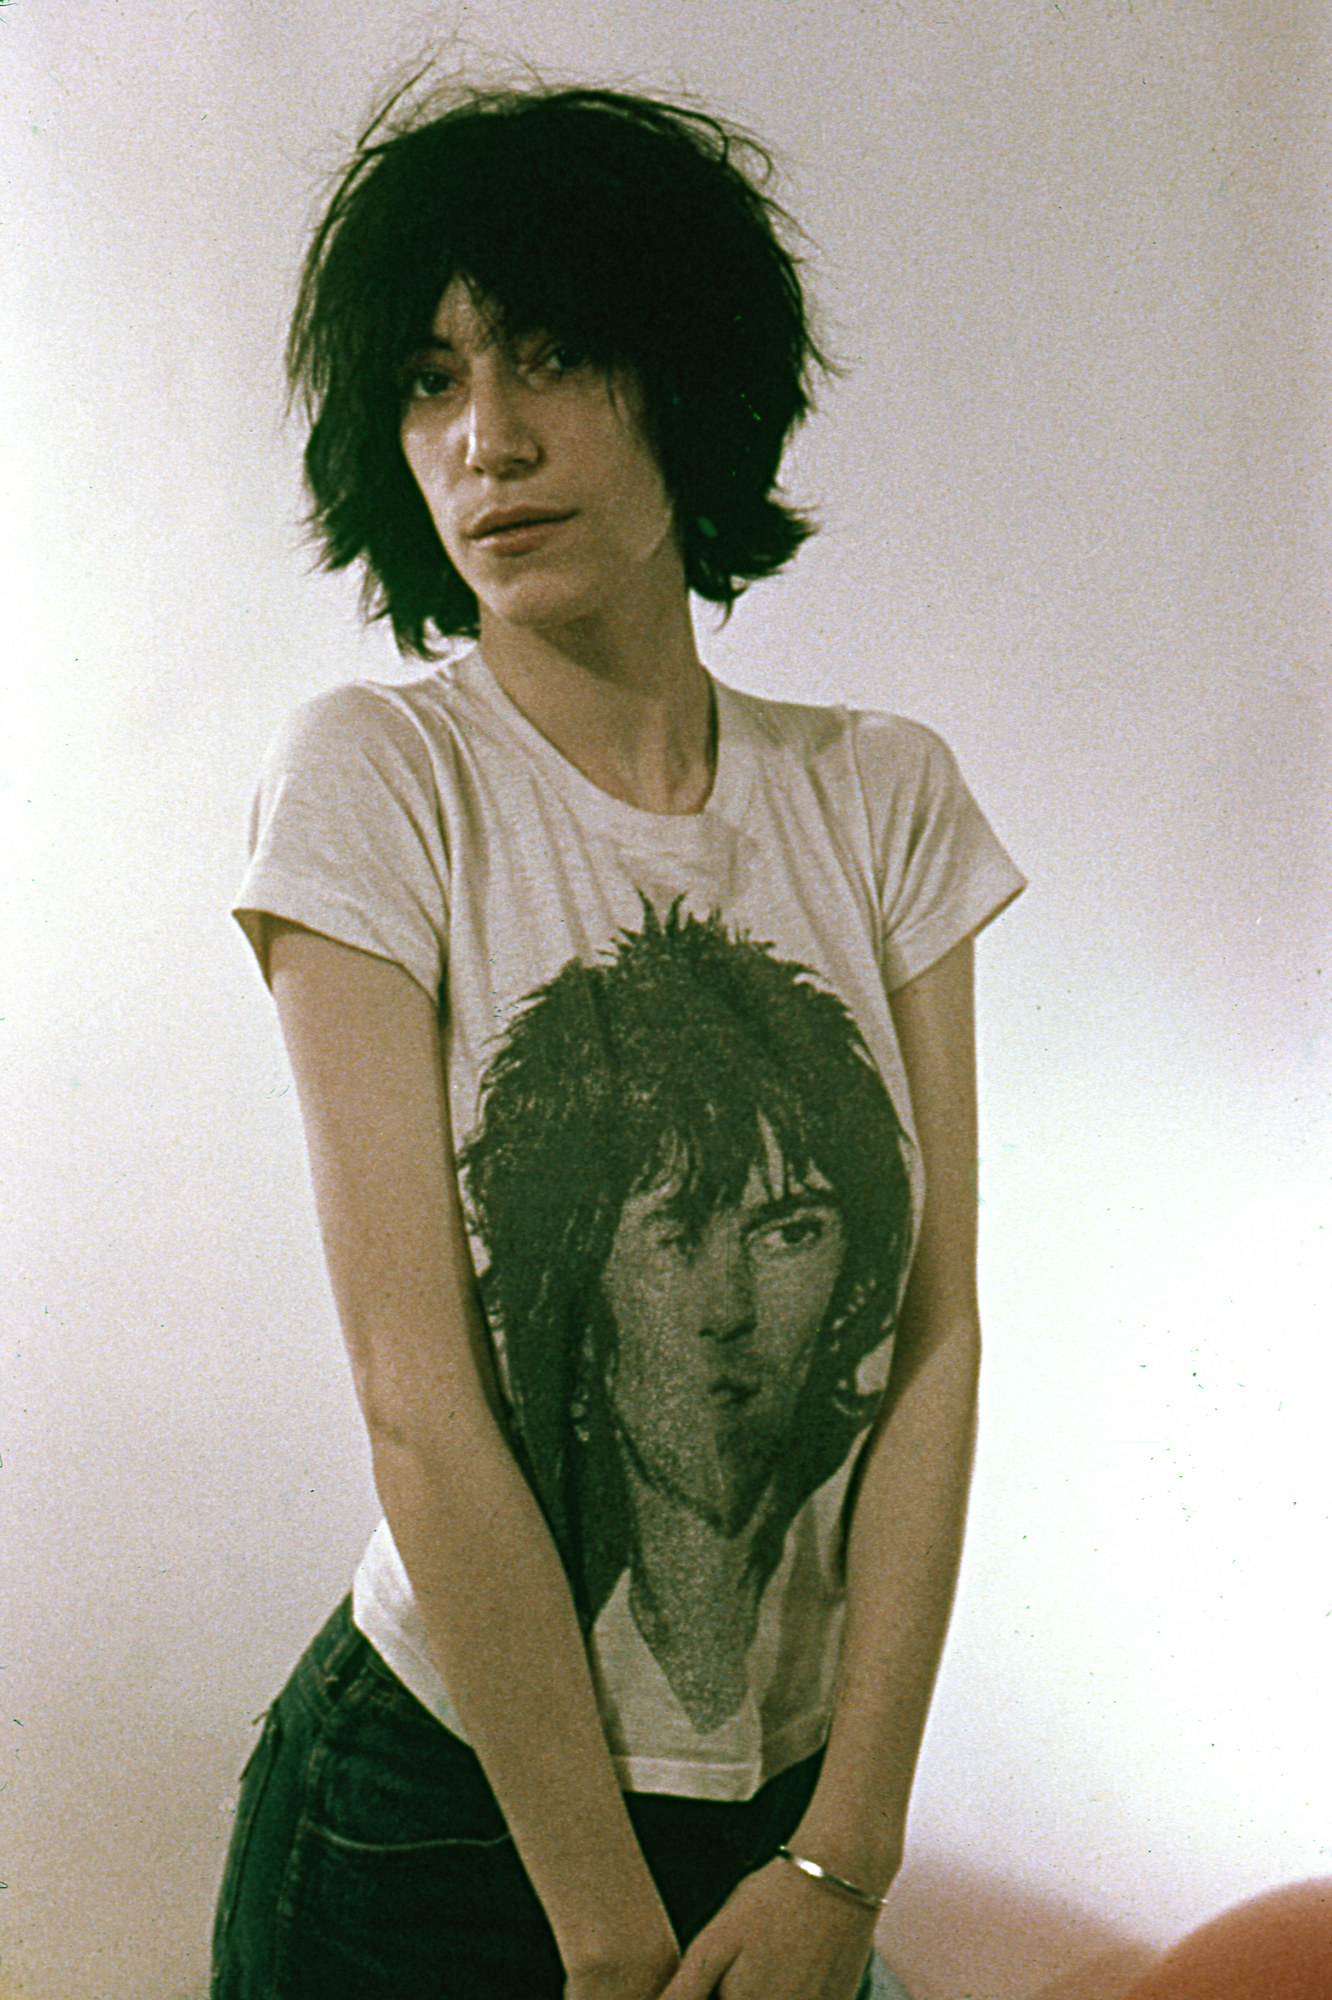 Smith posing for a portrait with a Keith Richards t-shirt on in 1974